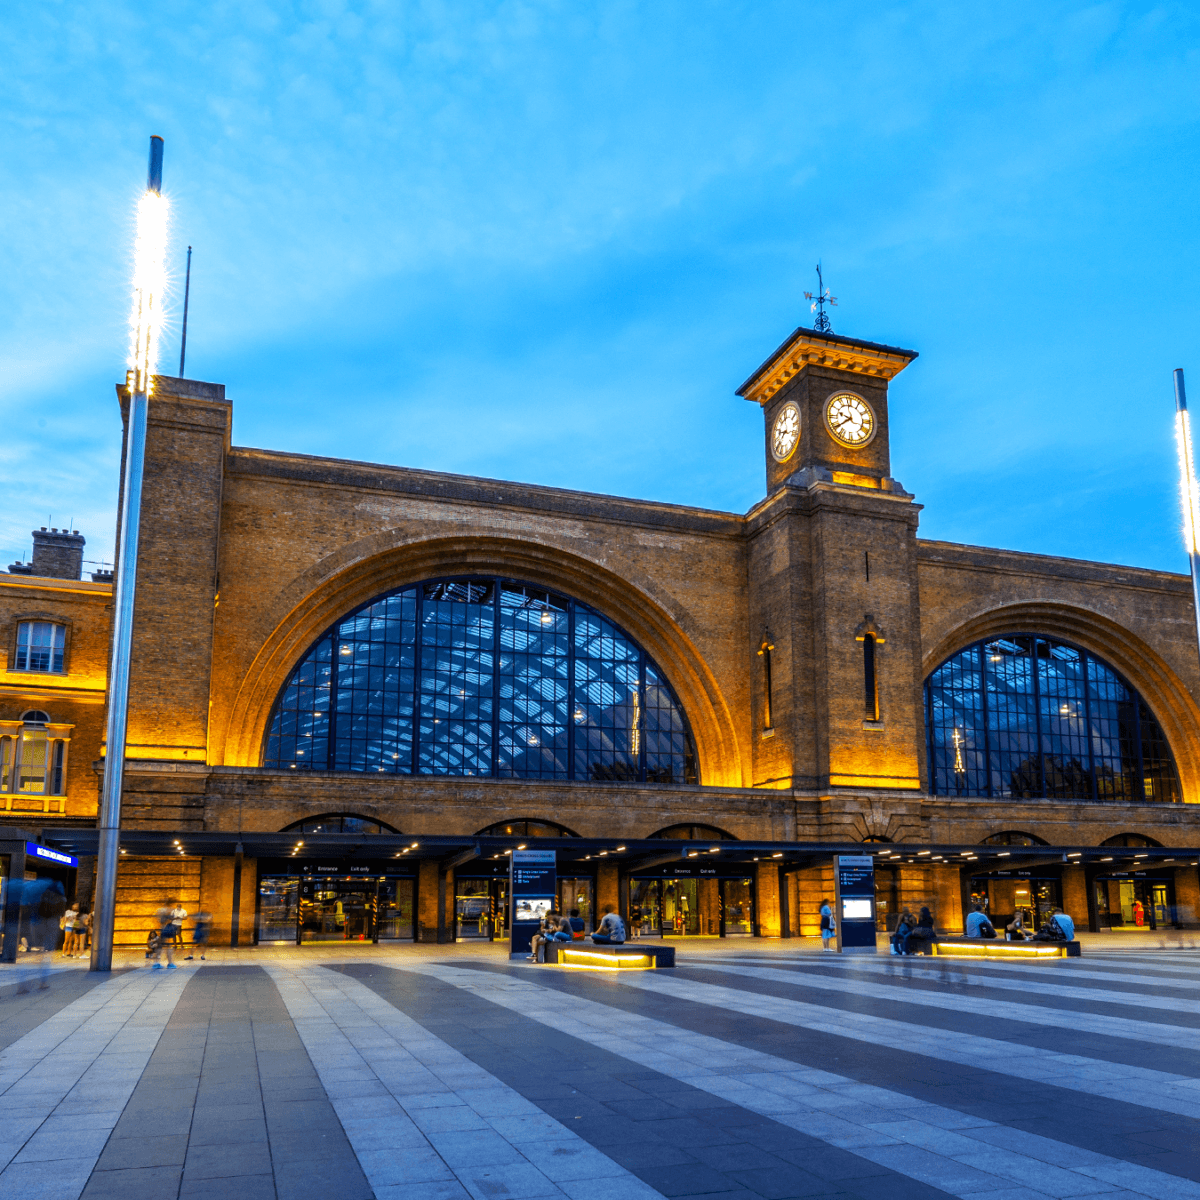 A photograph of the façade of King's Cross station